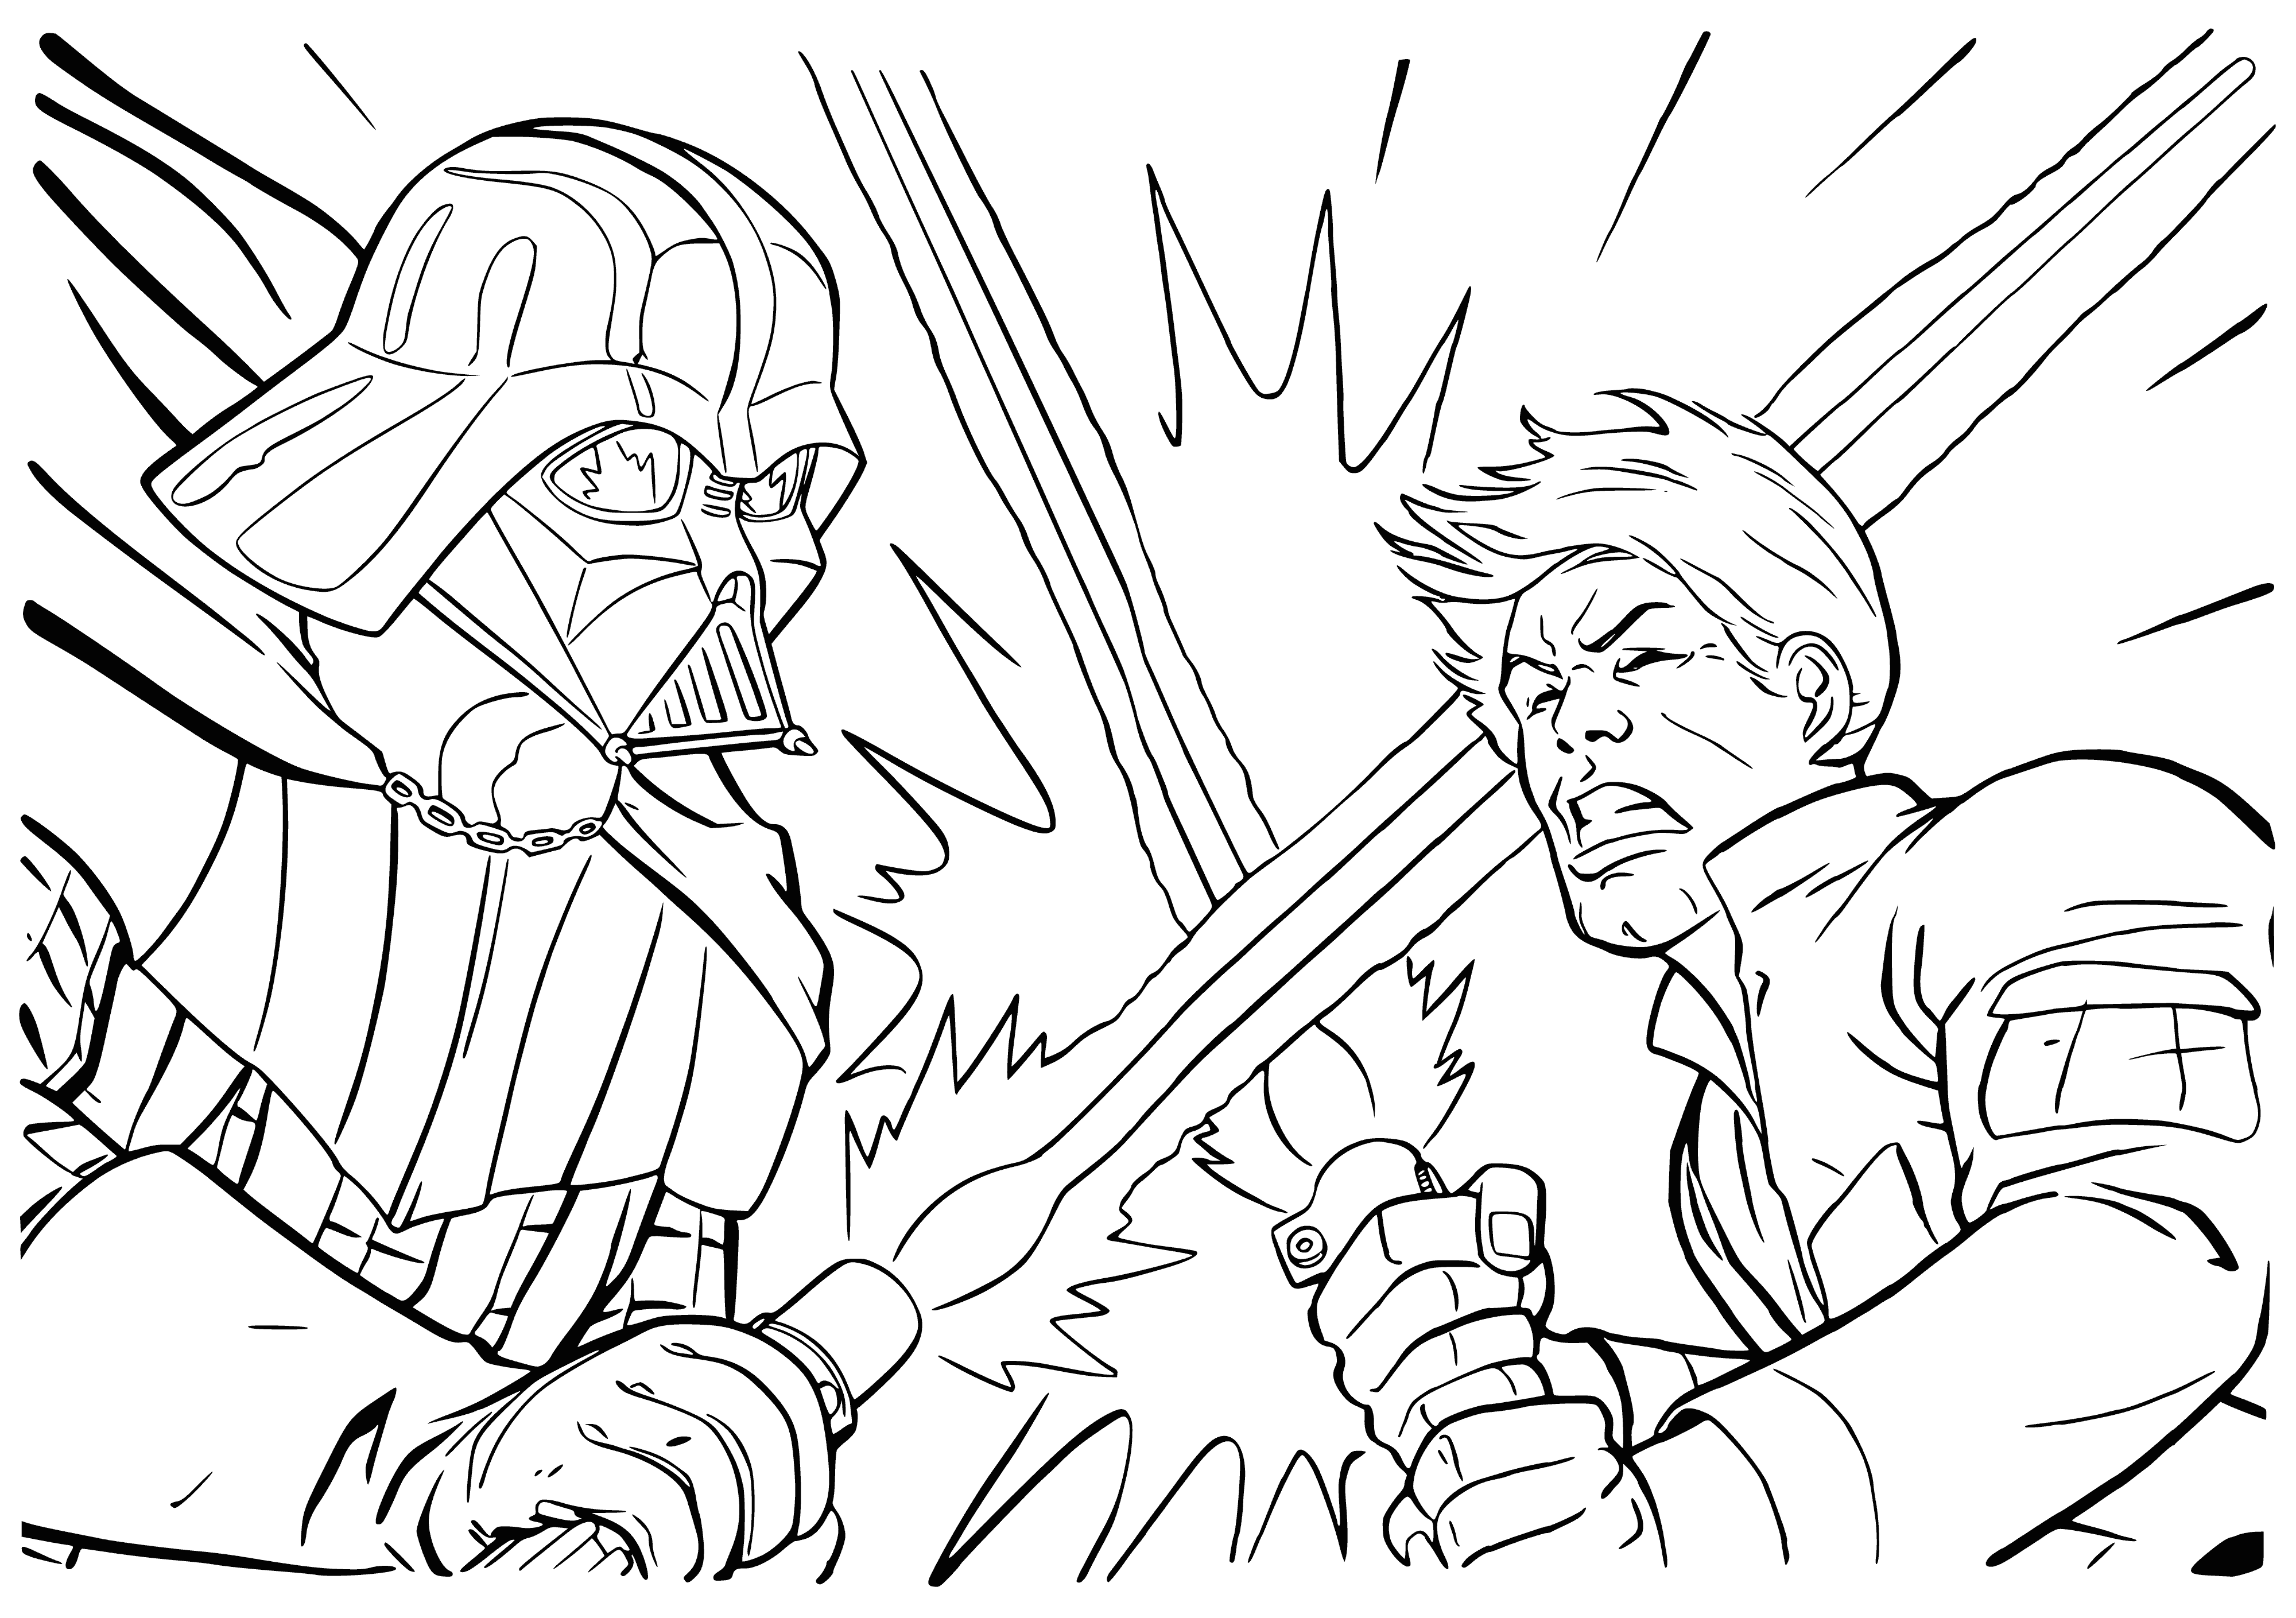 coloring page: Luke and Darth battle with lightsabers; Vader has black one above, Luke has green to the side; both focus intently.